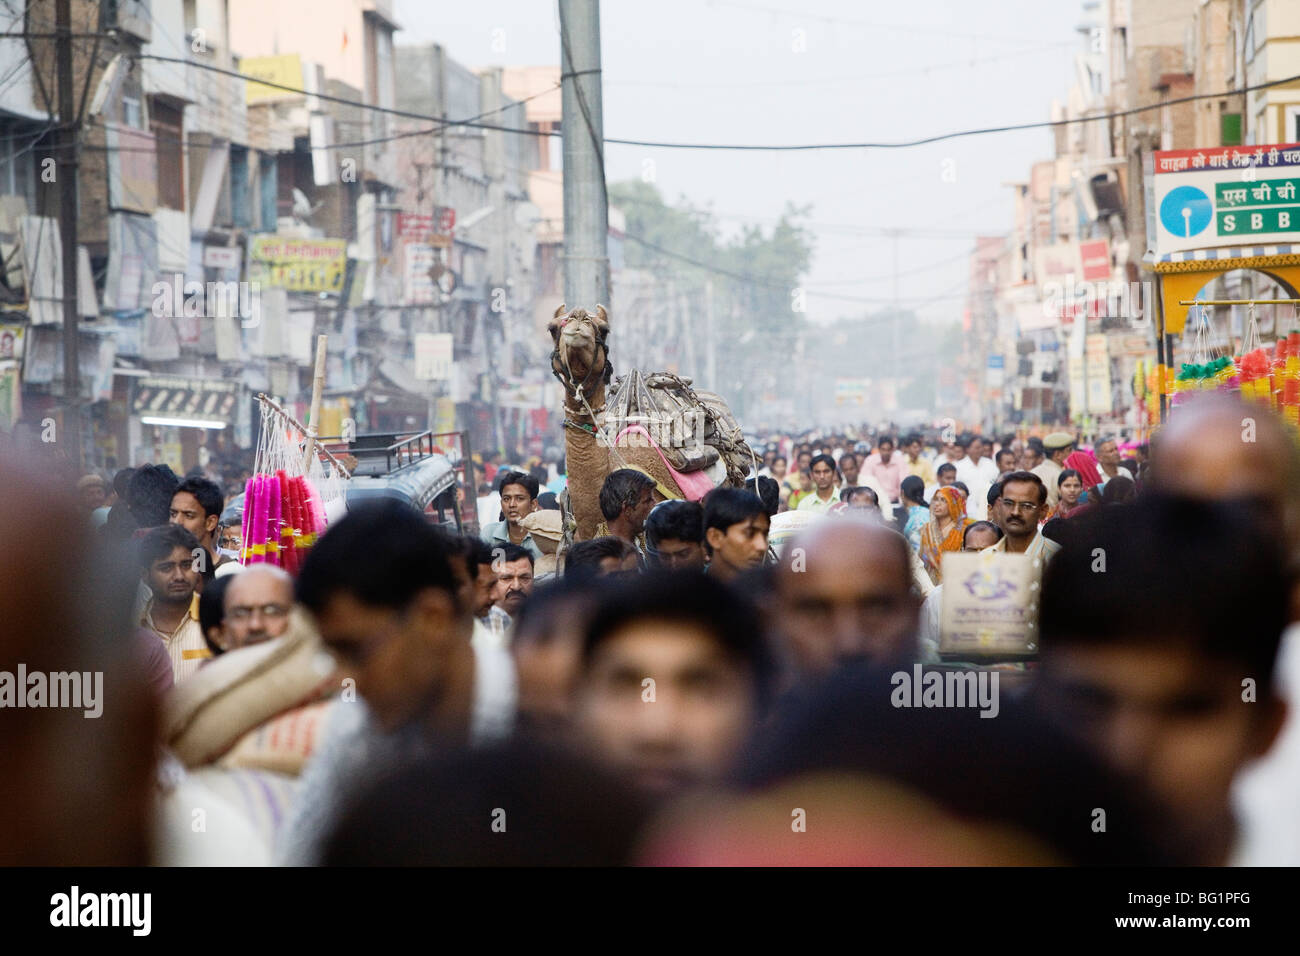 Camel cart in the centre of crowd in Bikaner, Rajasthan, India. Stock Photo